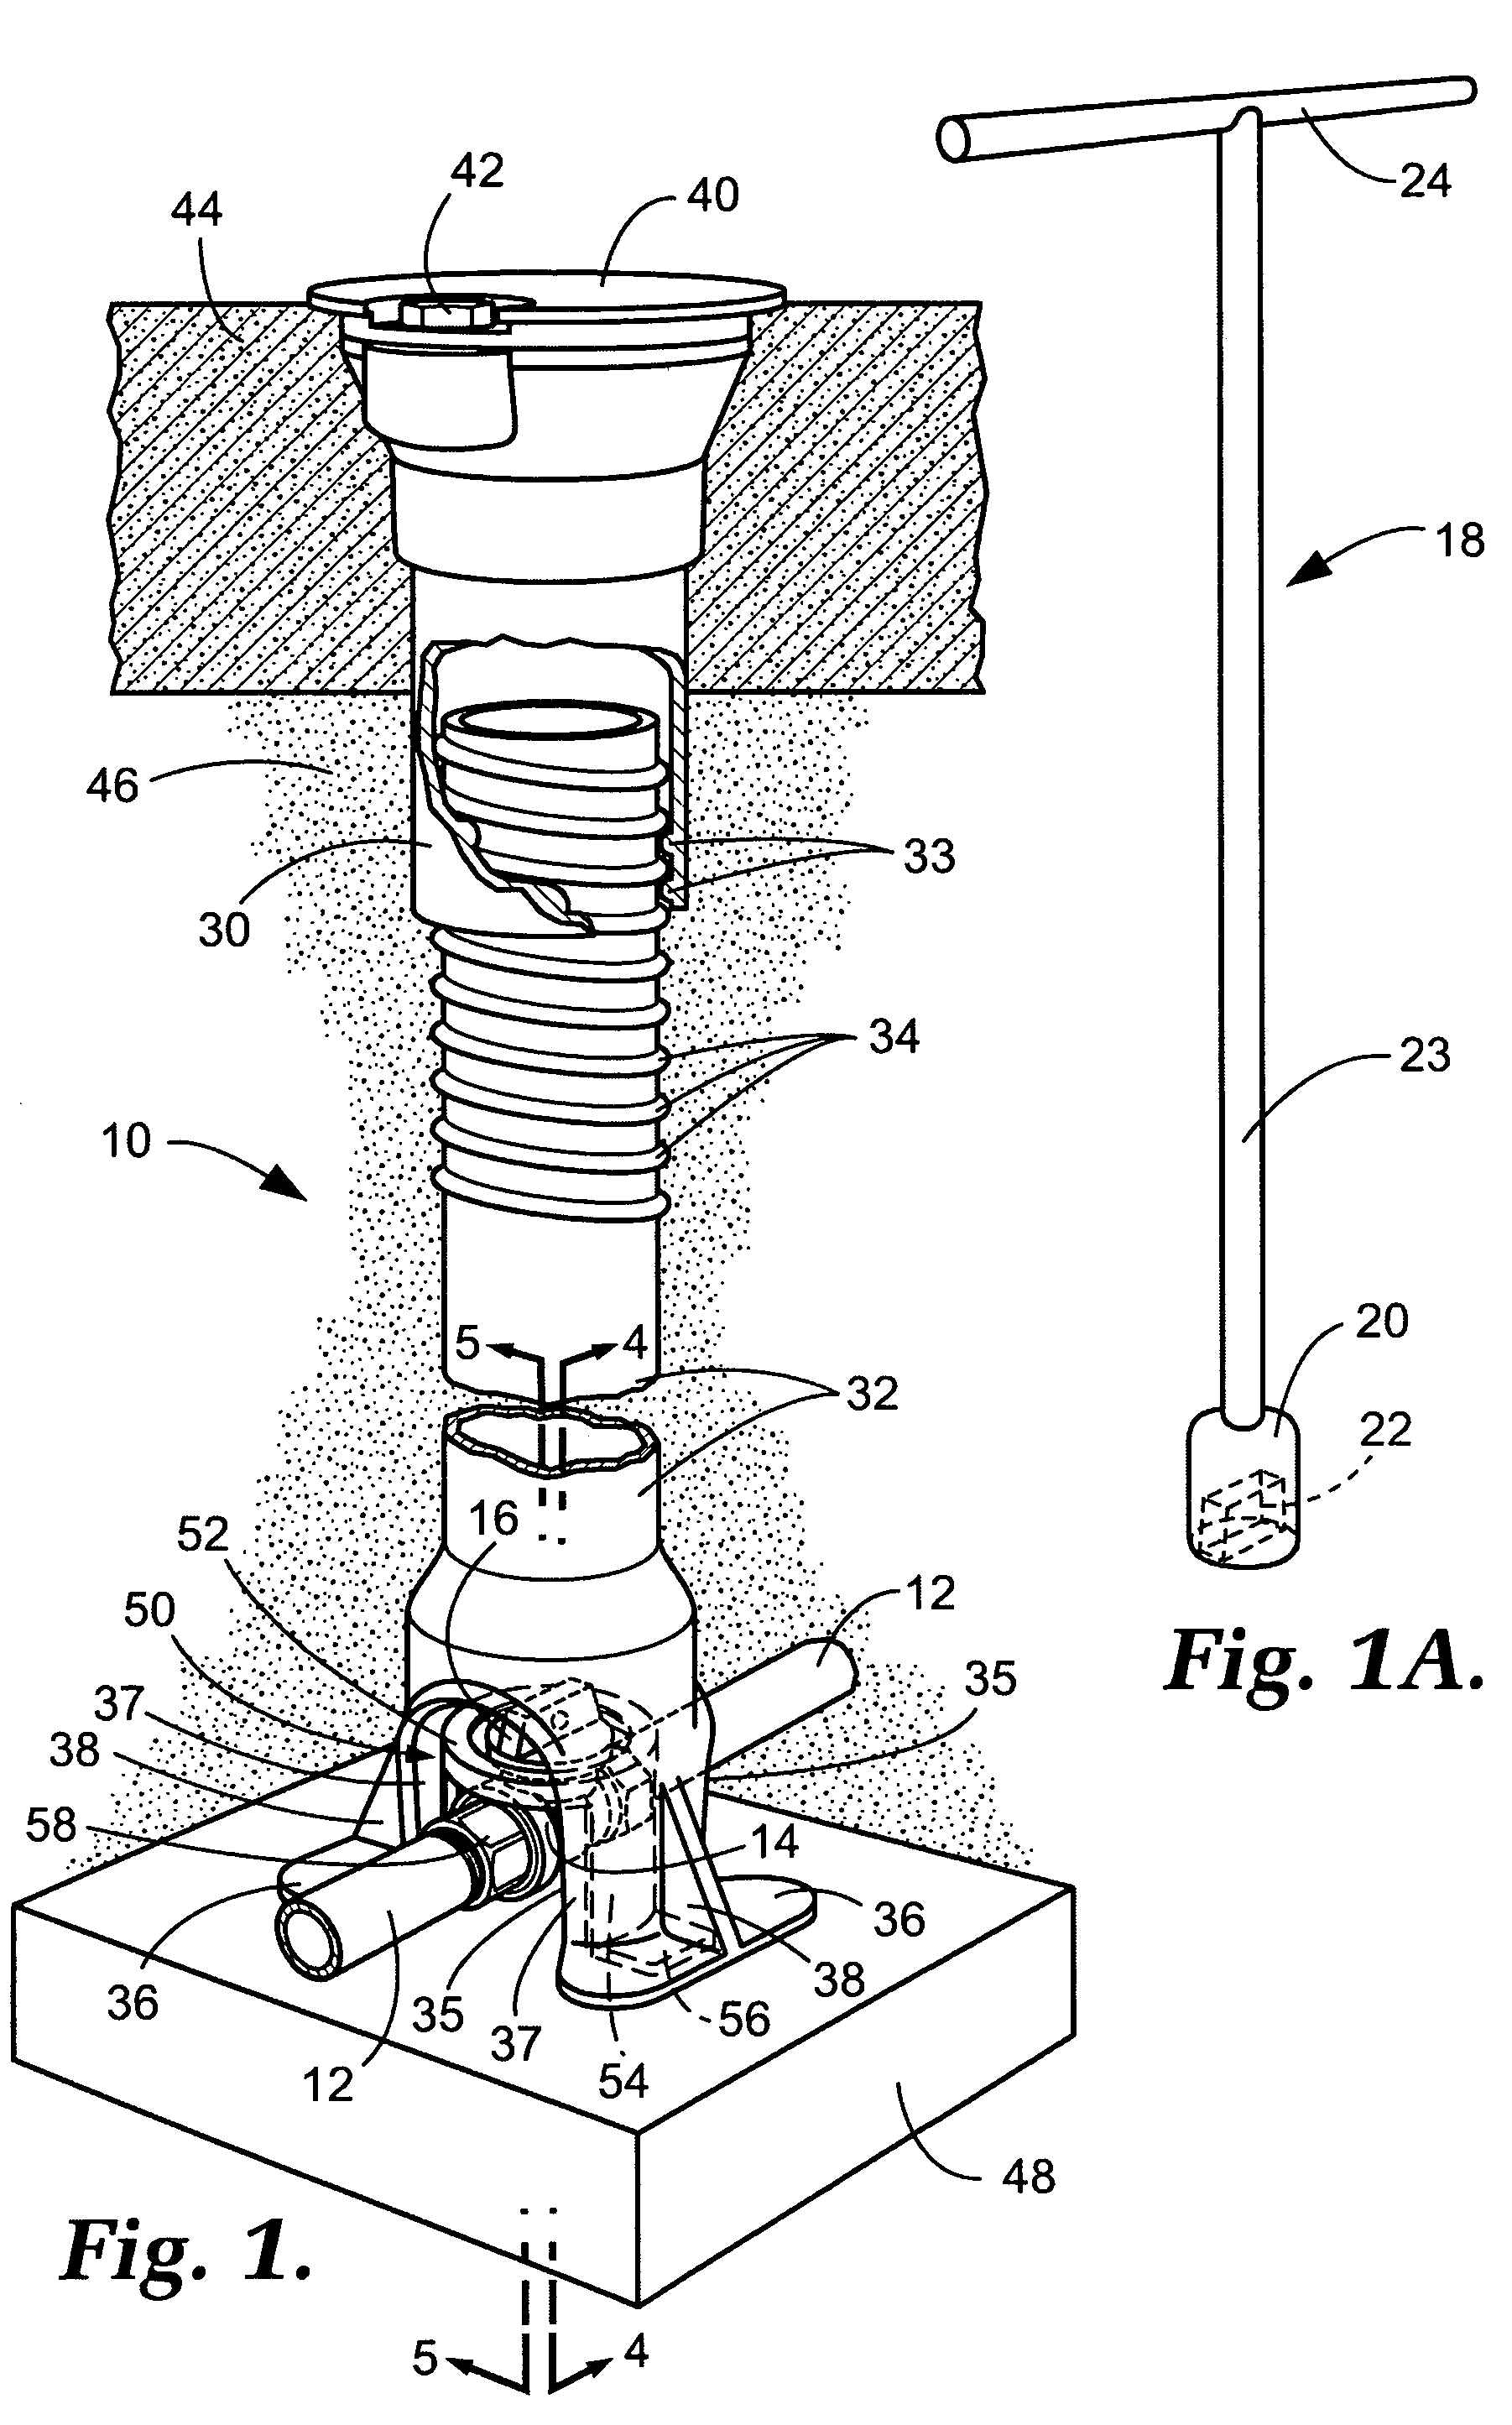 Valve key alignment assembly for curb stop box